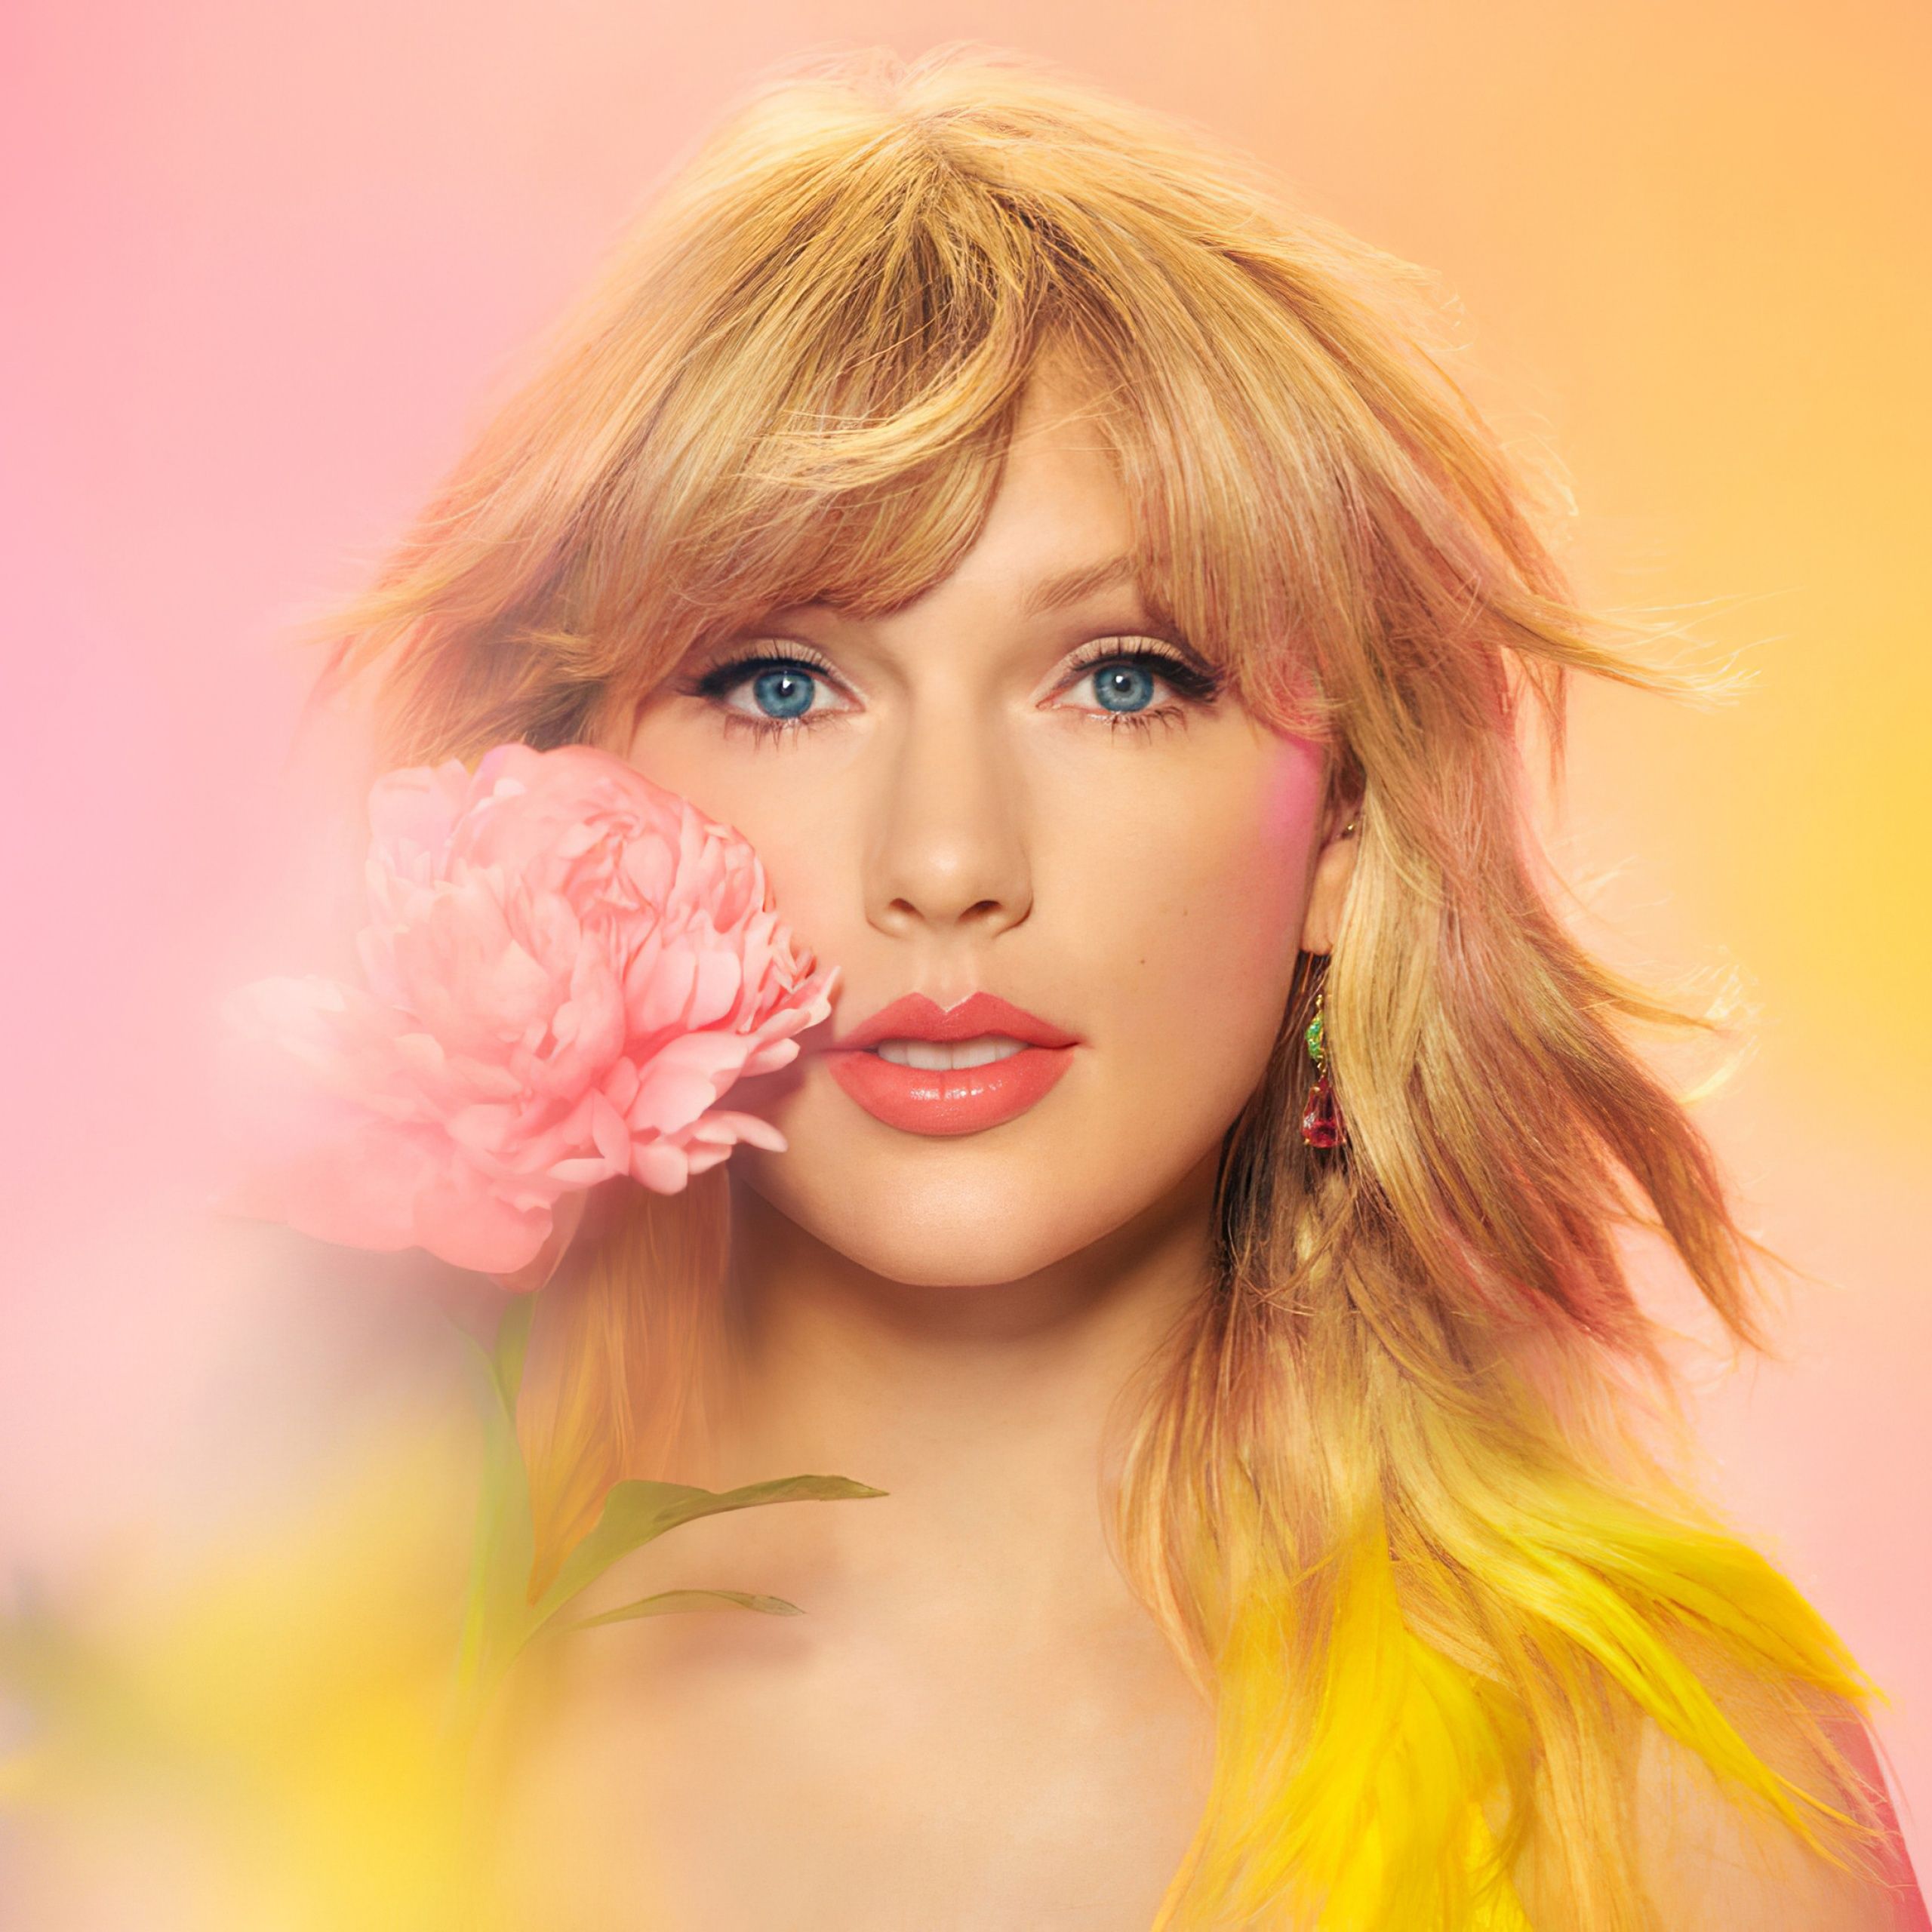 Taylor Swift holding a pink flower in front of her face - Taylor Swift